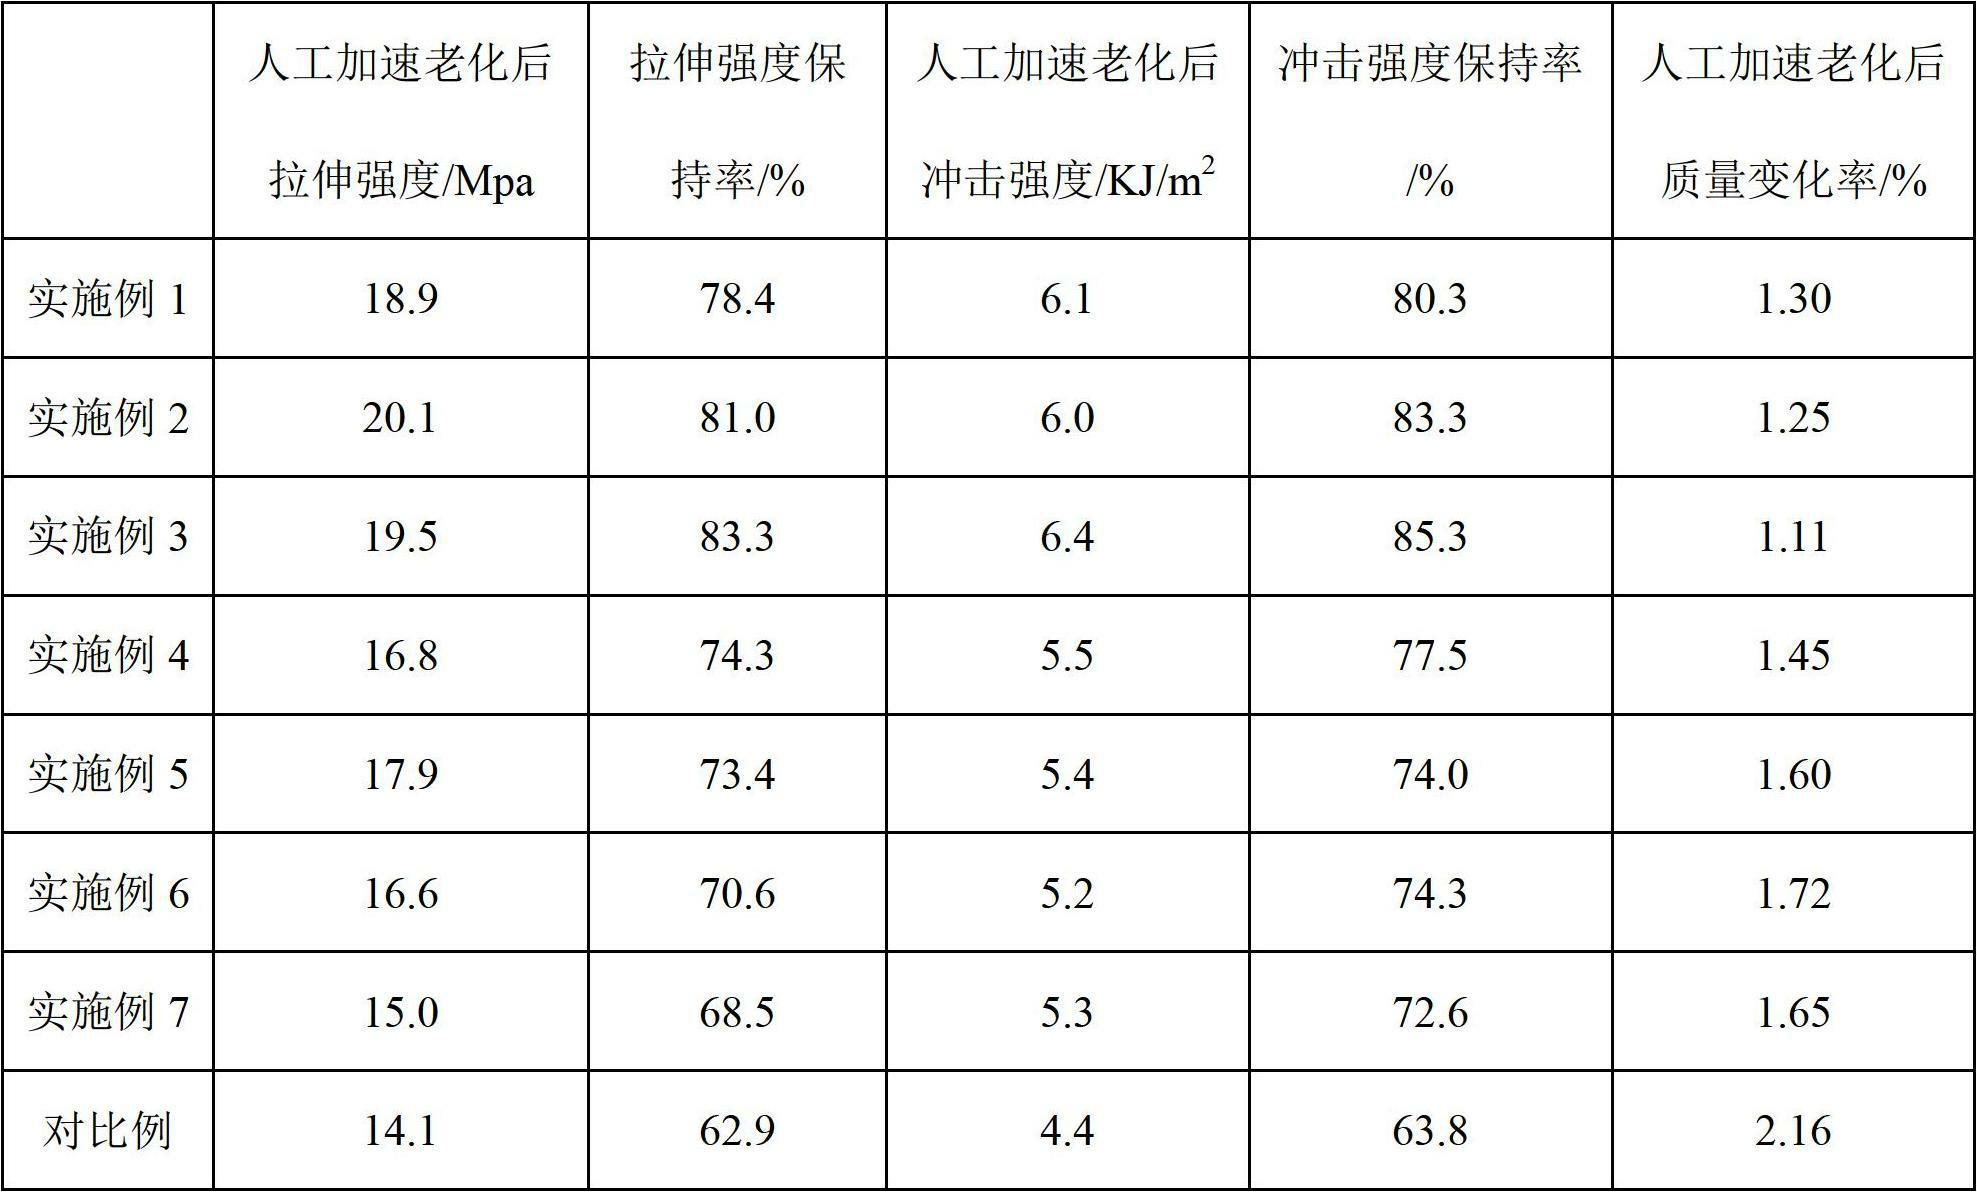 Anti-ageing PP/HDPE (Polypropylene/High-Density Polyethylene) plastic for automobile interior and preparation method thereof